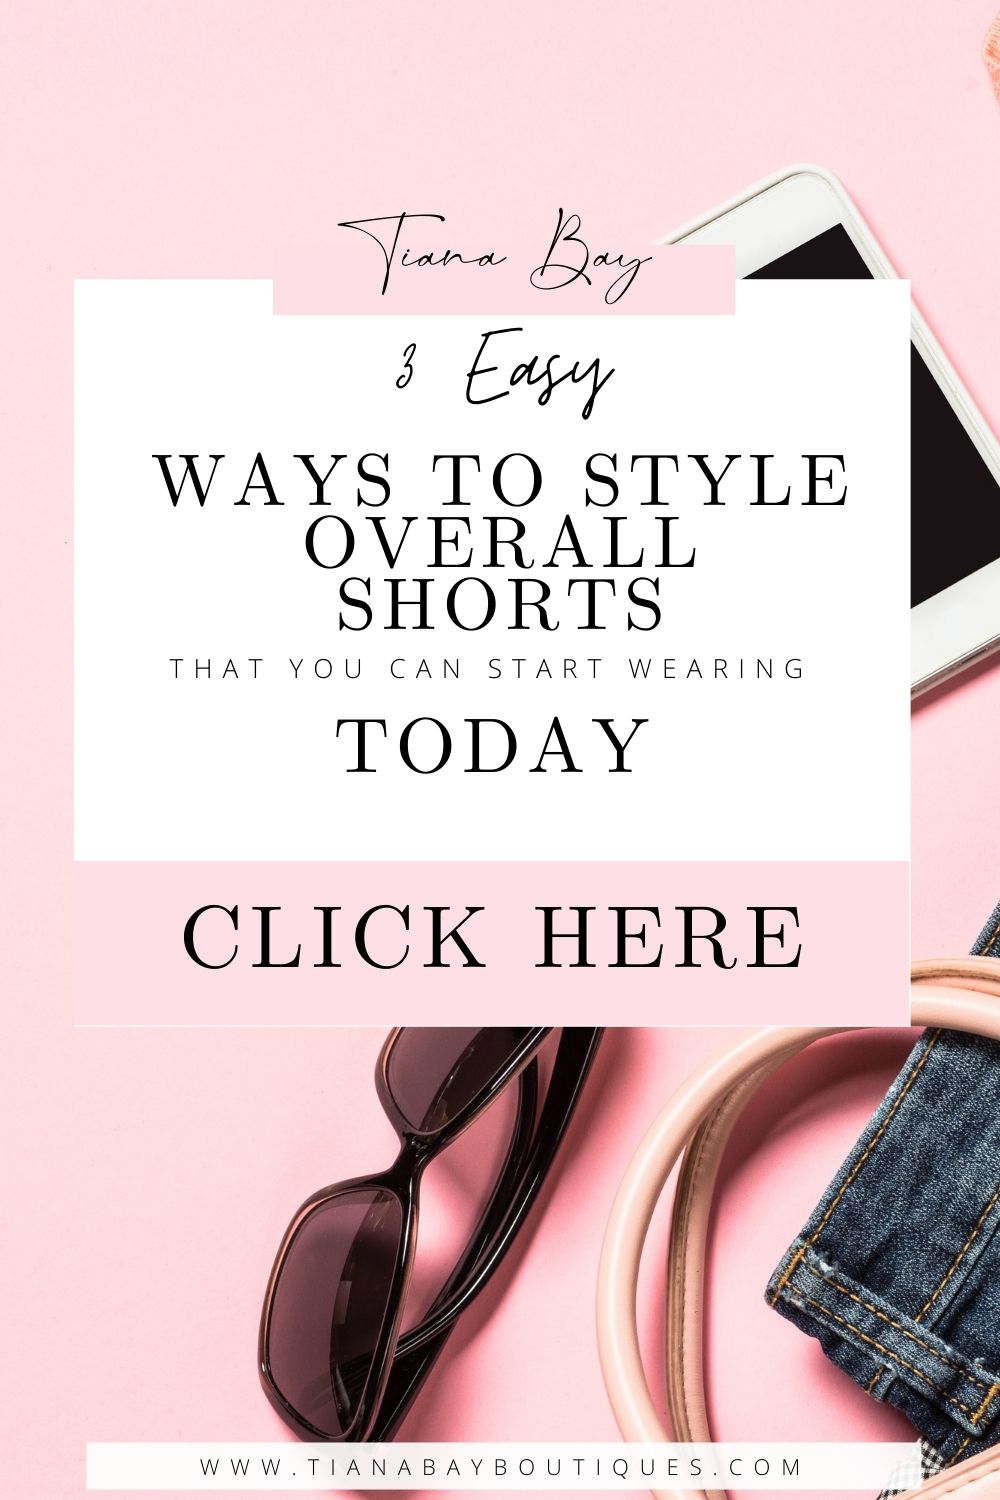 How to wear Overall Shorts | What to wear with Overall Shorts 